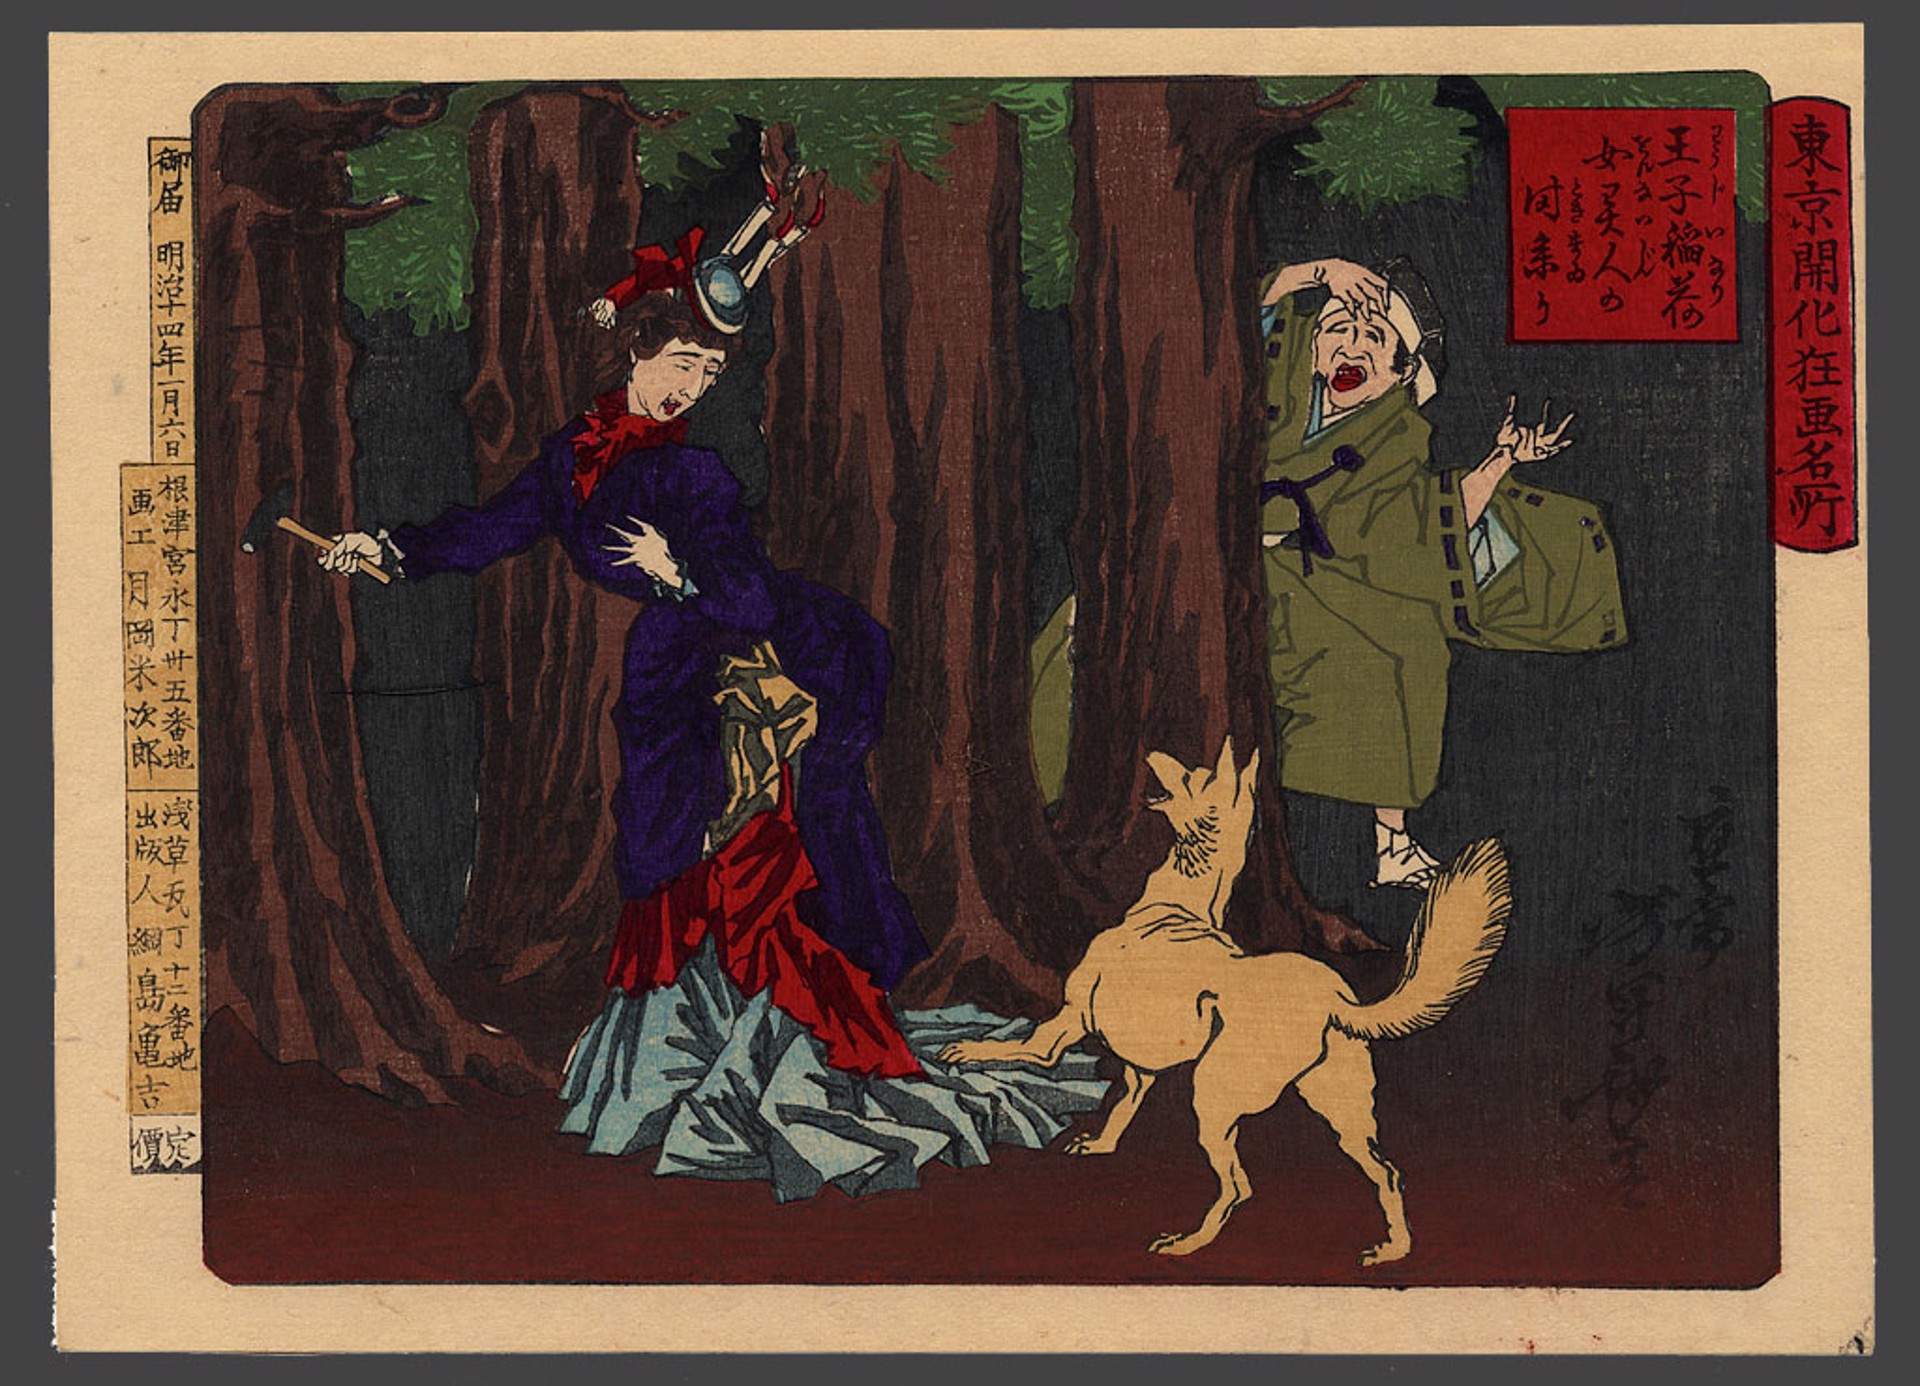 A foreign lady performing sorcery at Inari Shrine Comic pictures of famous places amid the civiization of Tokyo by Yoshitoshi